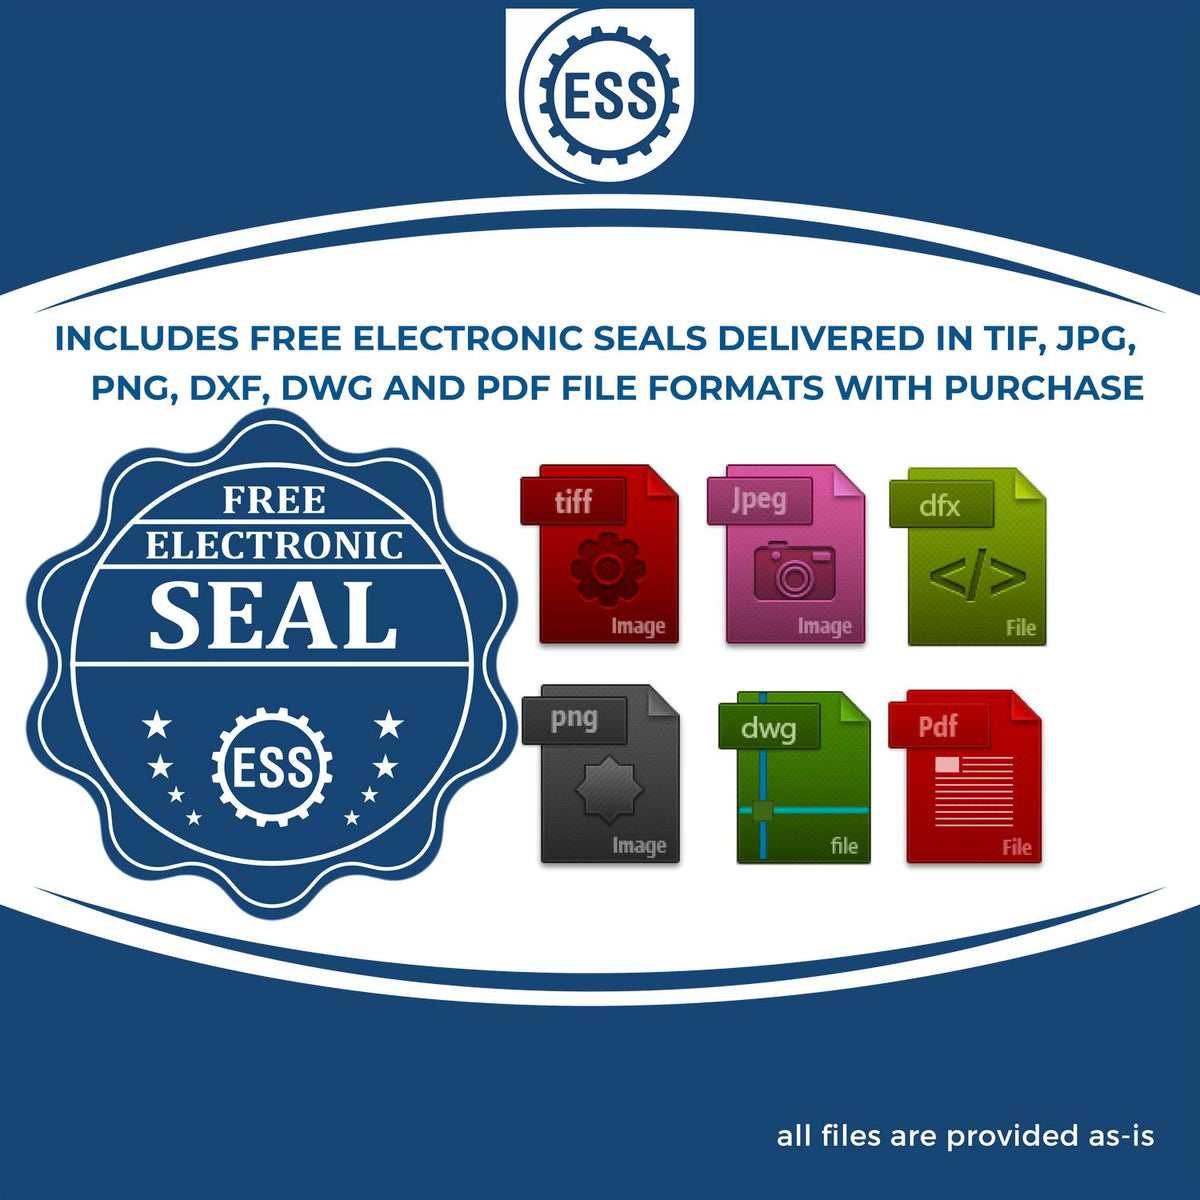 An infographic for the free electronic seal for the Slim Pre-Inked Wisconsin Professional Geologist Seal Stamp illustrating the different file type icons such as DXF, DWG, TIF, JPG and PNG.